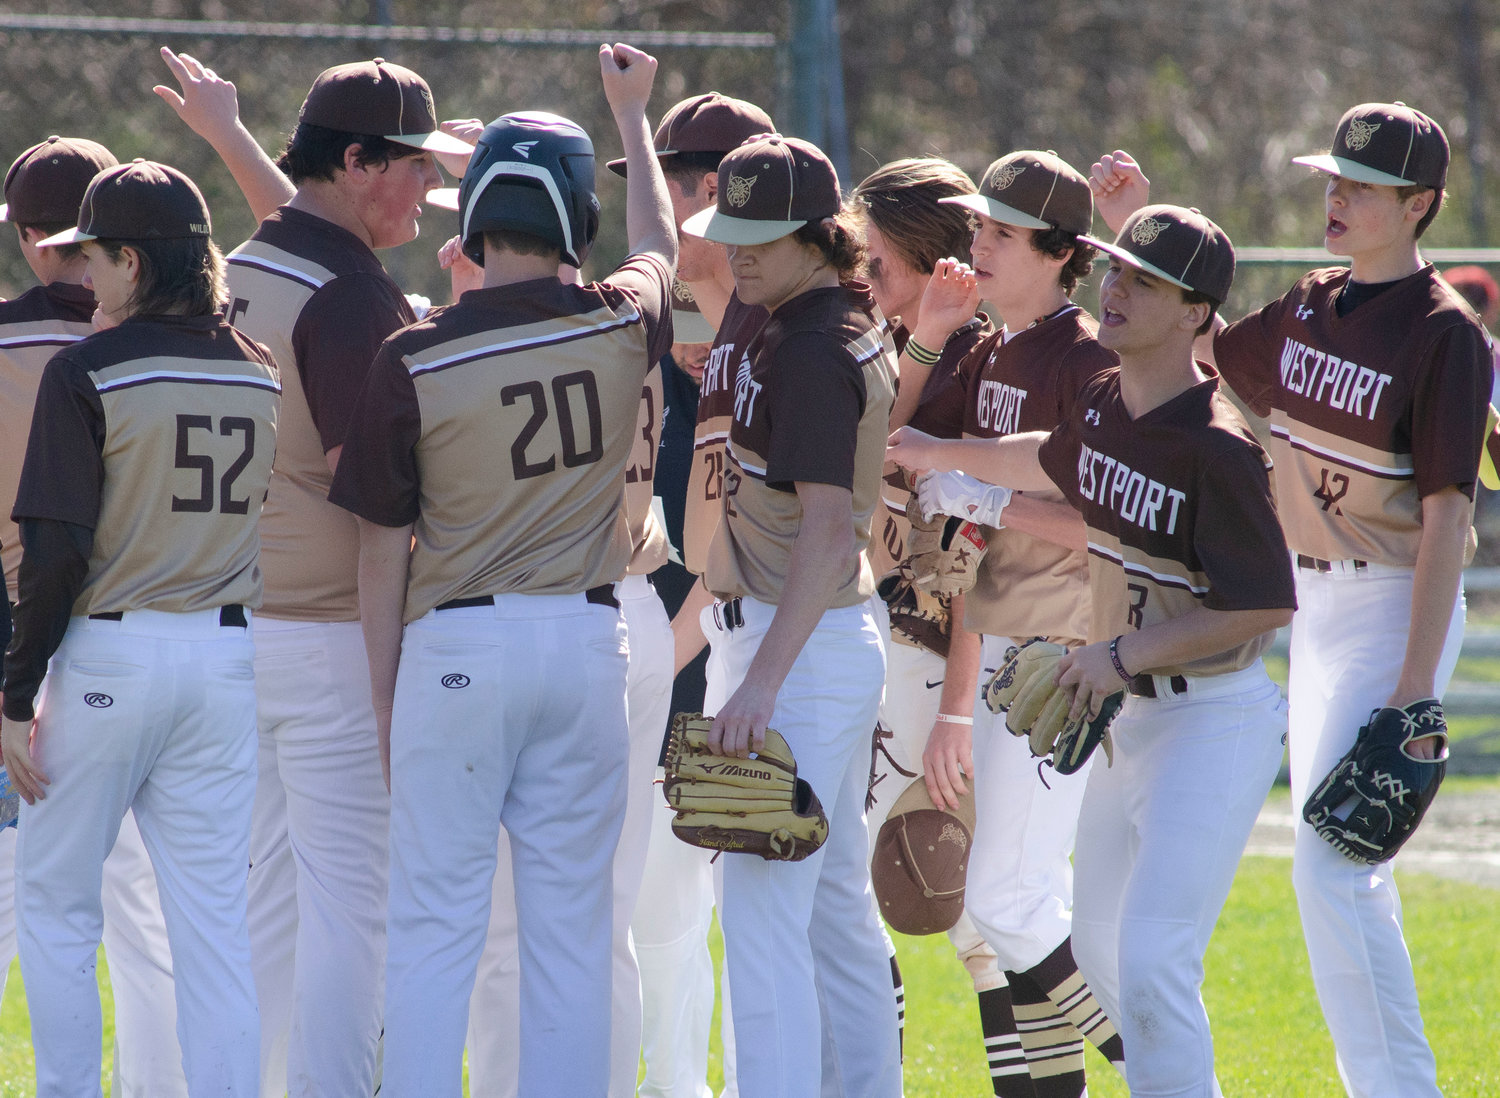 Cam Leary (middle) and the team huddle in front of the dug out after an inning in the field.